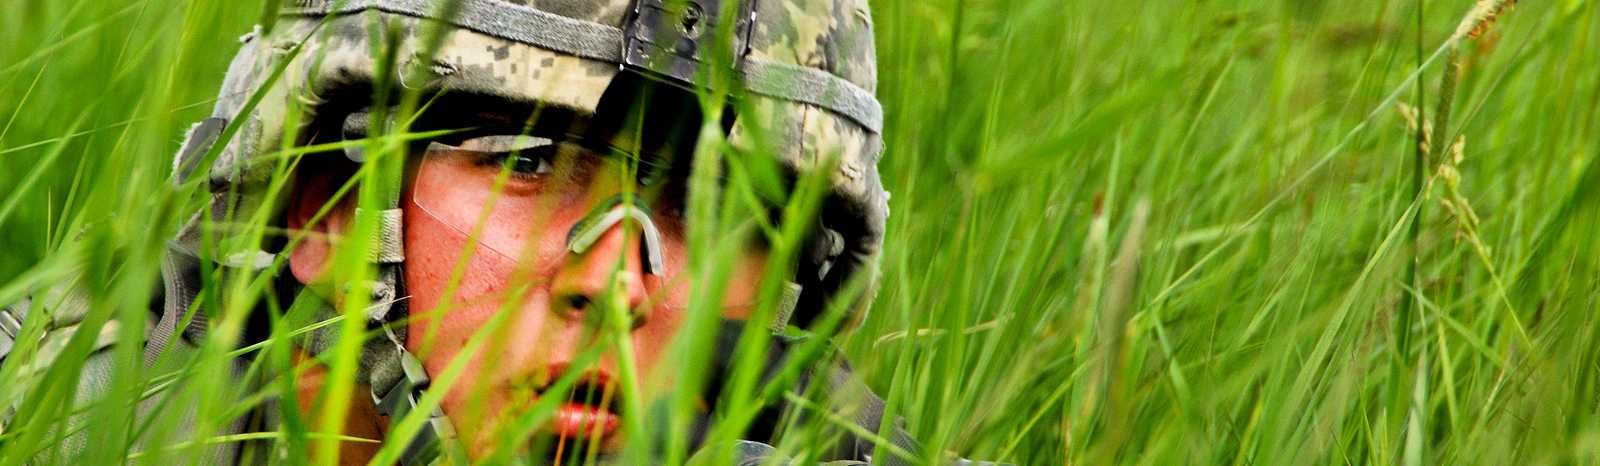 Soldier in the grass